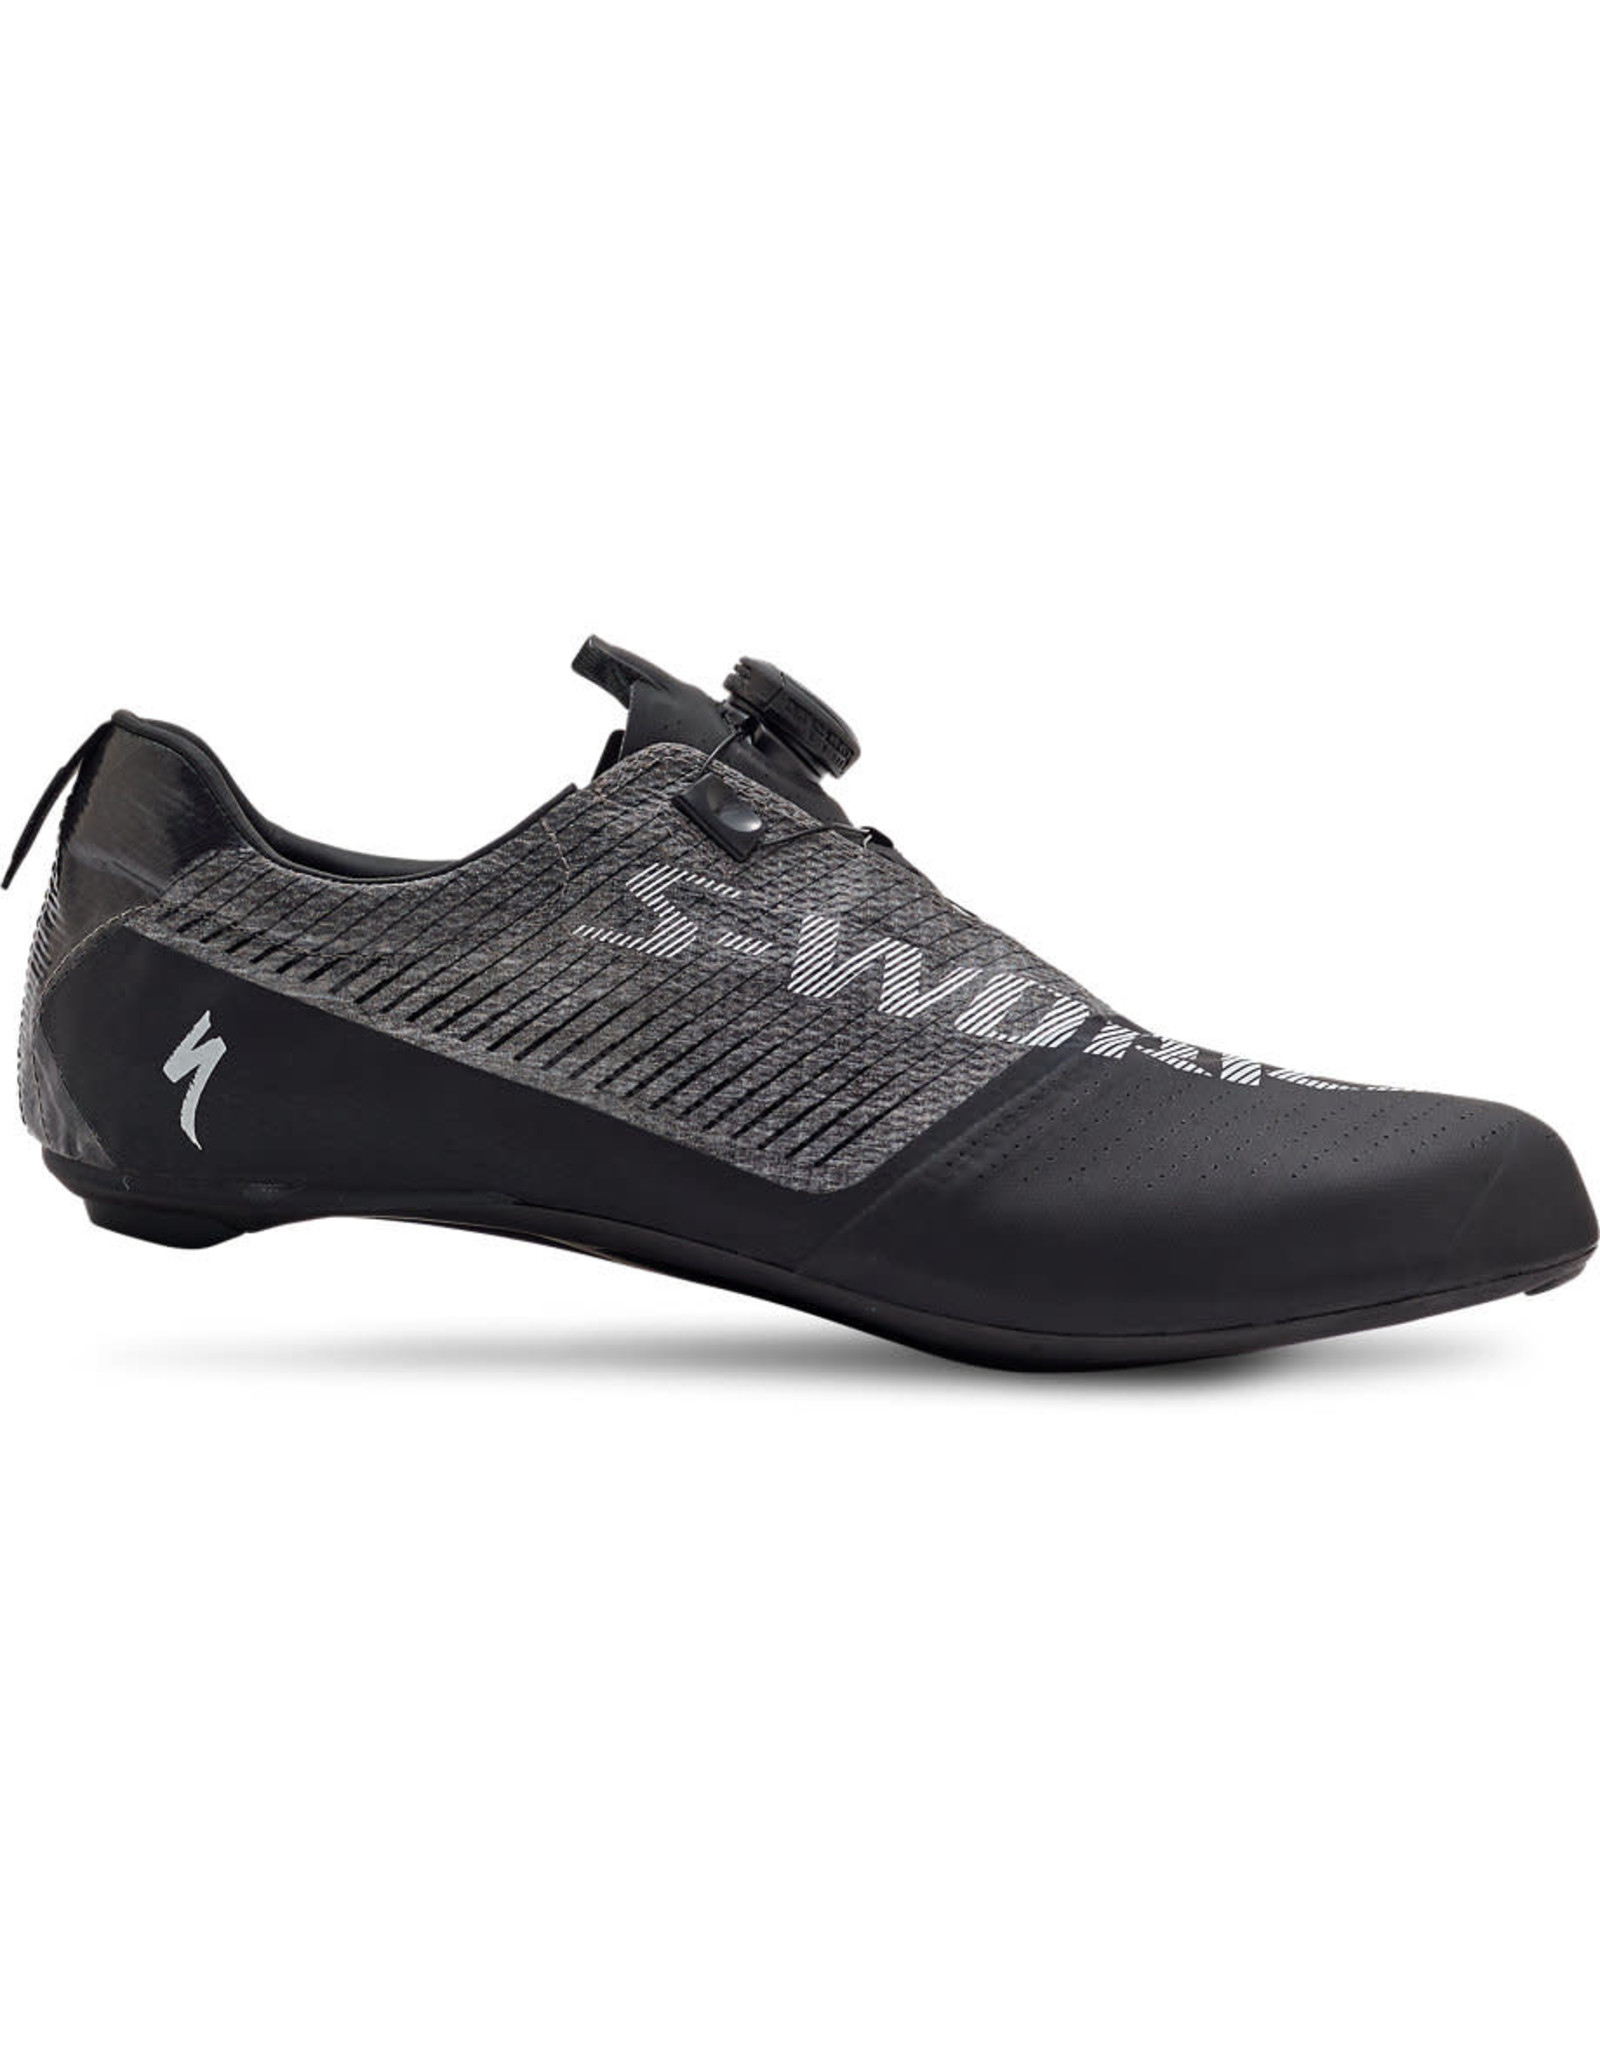 Specialized SPECIALIZED, S-Works Exos Road Shoes, Black